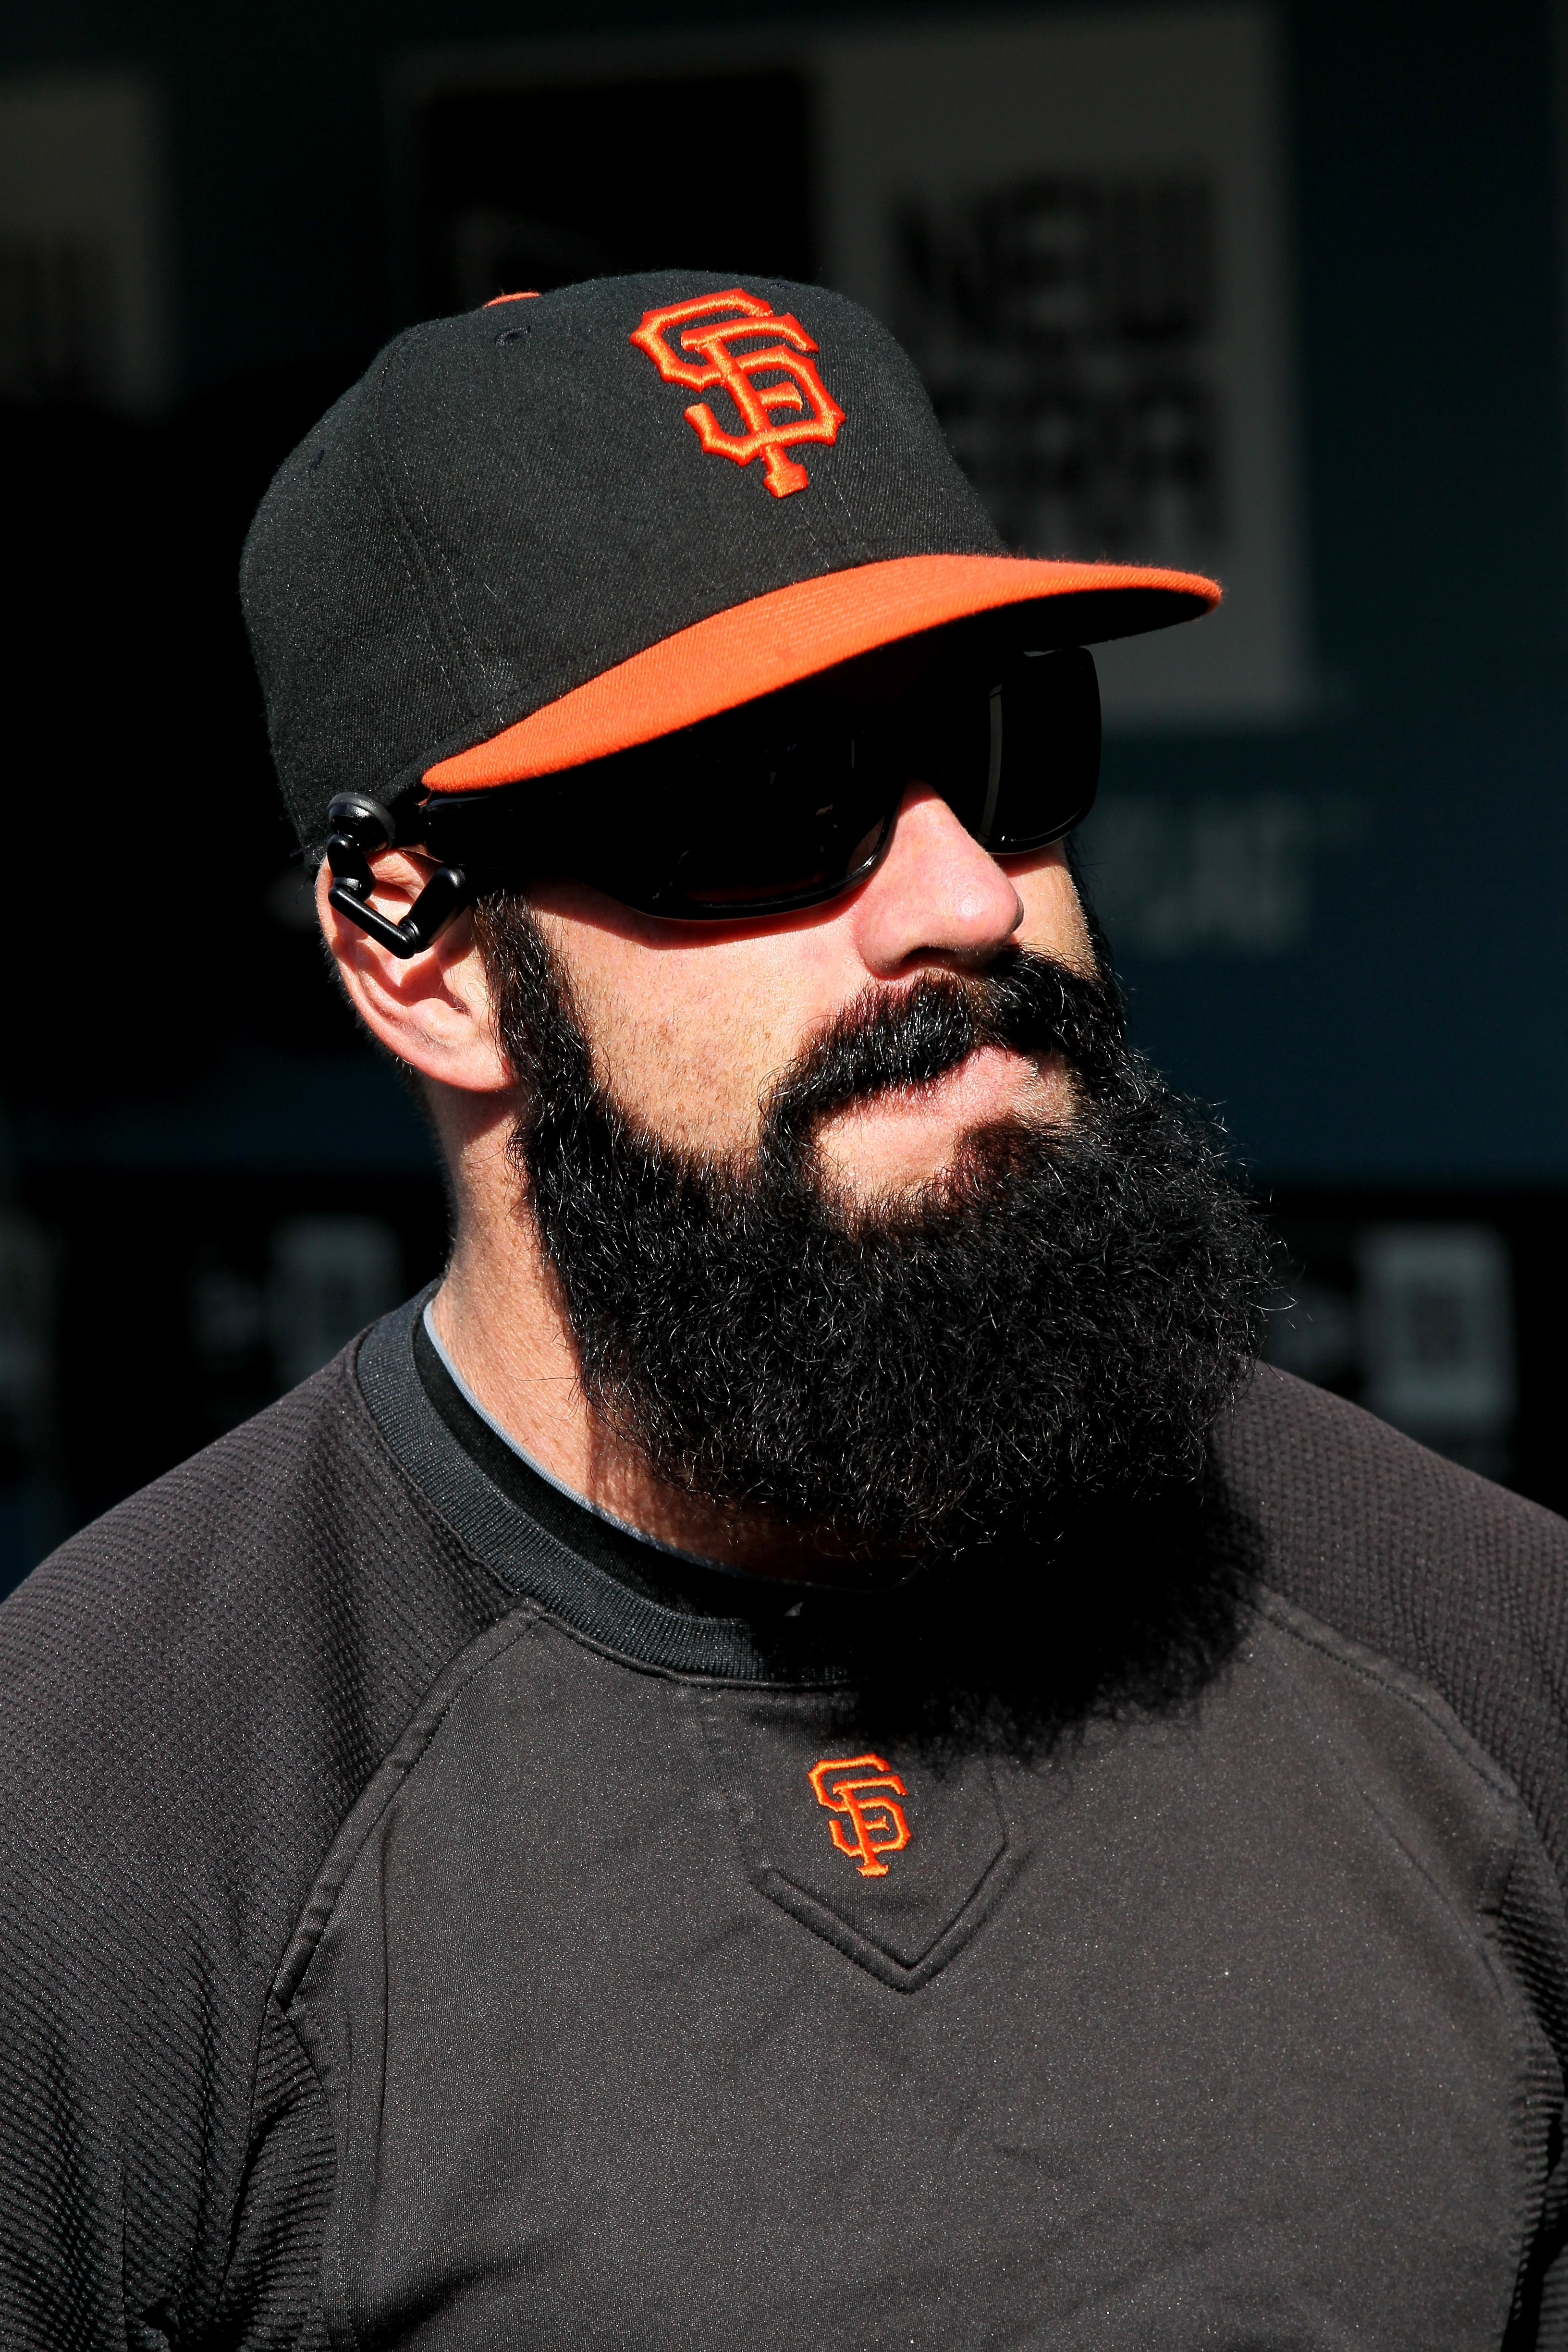 LOS ANGELES, CA - MAY 18:  Closer Brian Wilson #38 of the San Francisco Giants stands in the dugout before the game with the Los Angeles Dodgers on May 18, 2011 at Dodger Stadium in Los Angeles, California.  (Photo by Stephen Dunn/Getty Images)